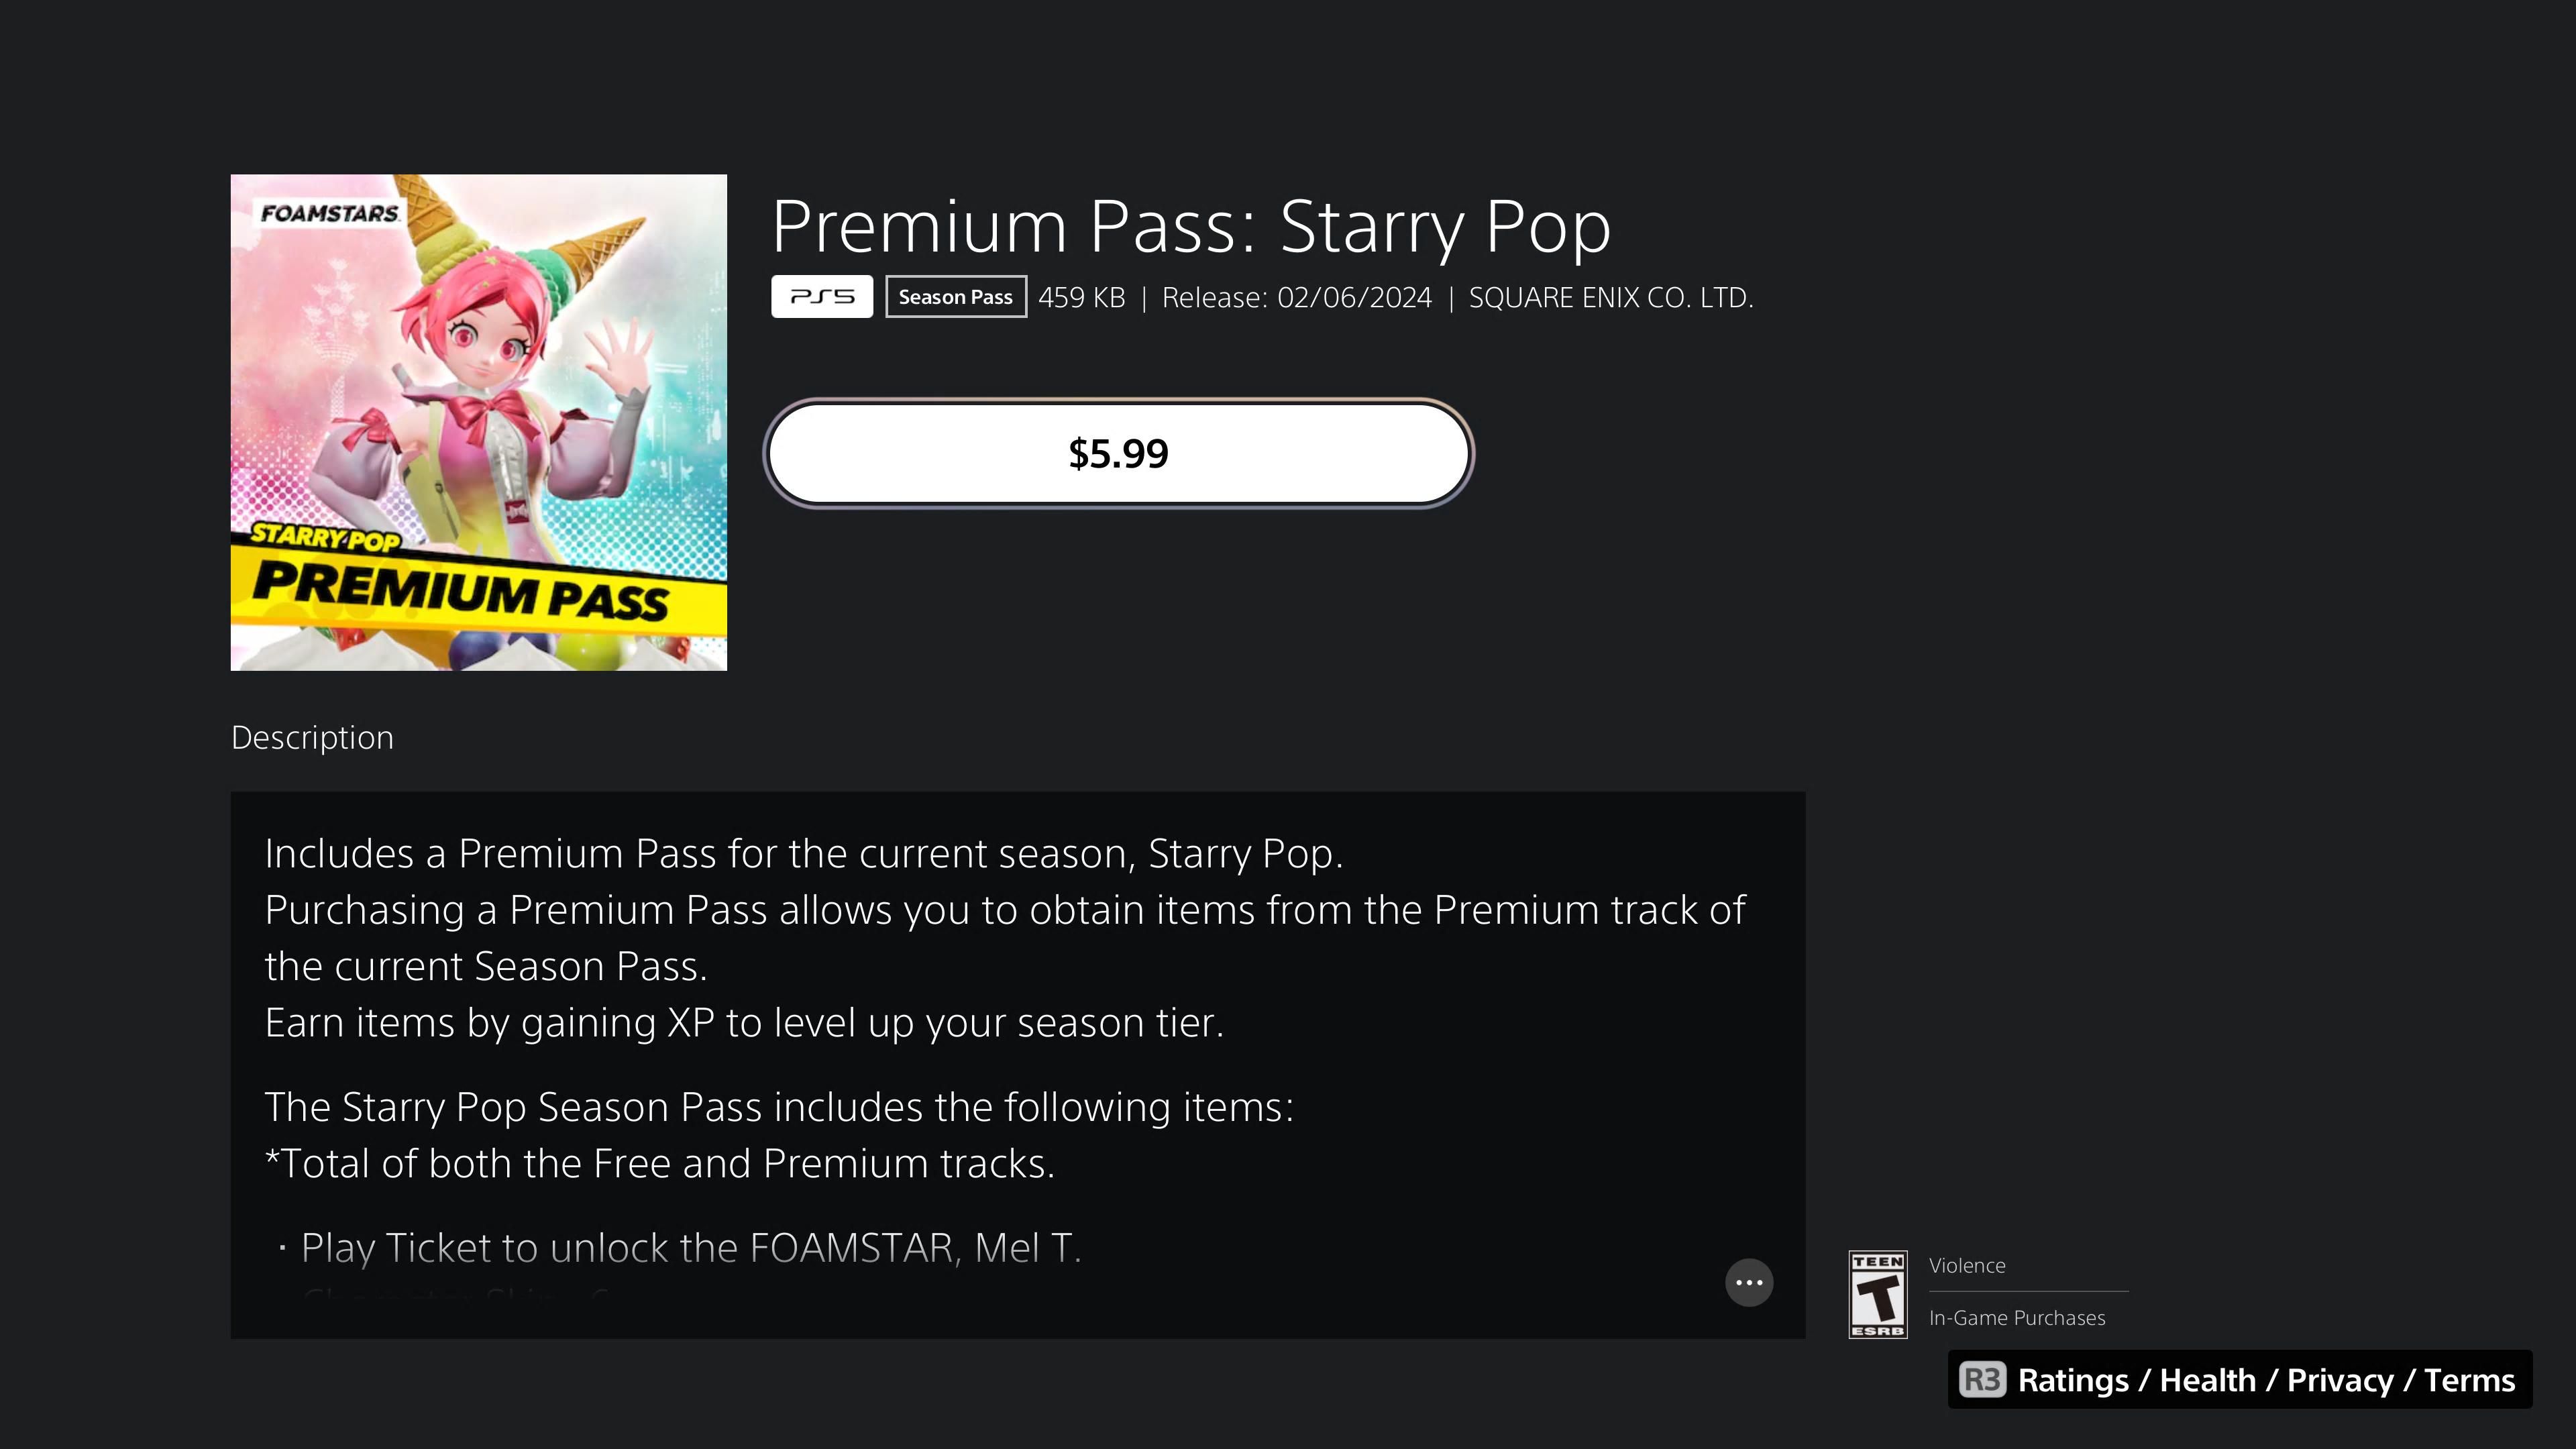 The Premium Pass: Starry Pop,  showing that it costs $5.99 in Foamstars.